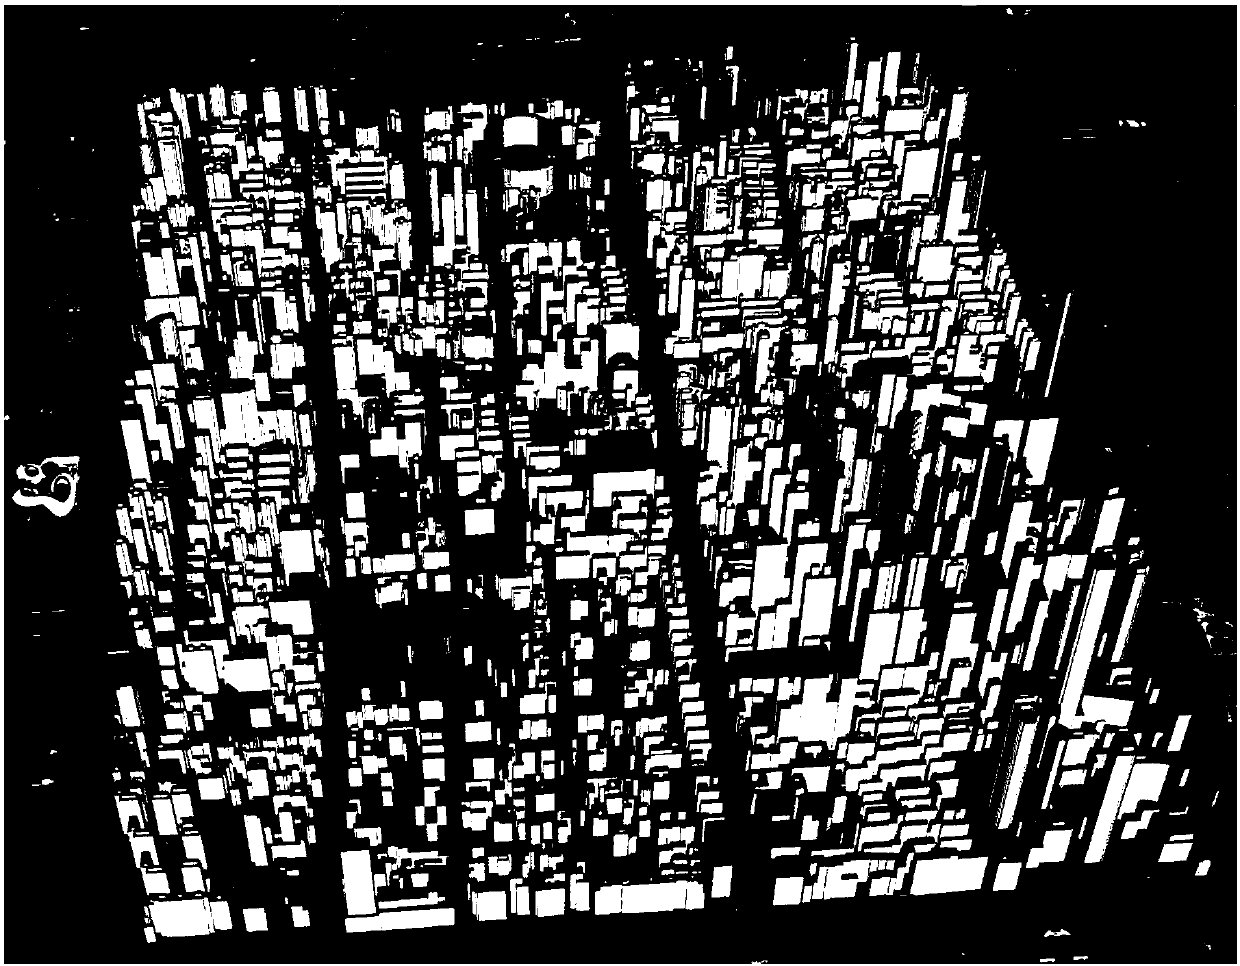 Three-dimensional automatic modeling and visualization method for city building